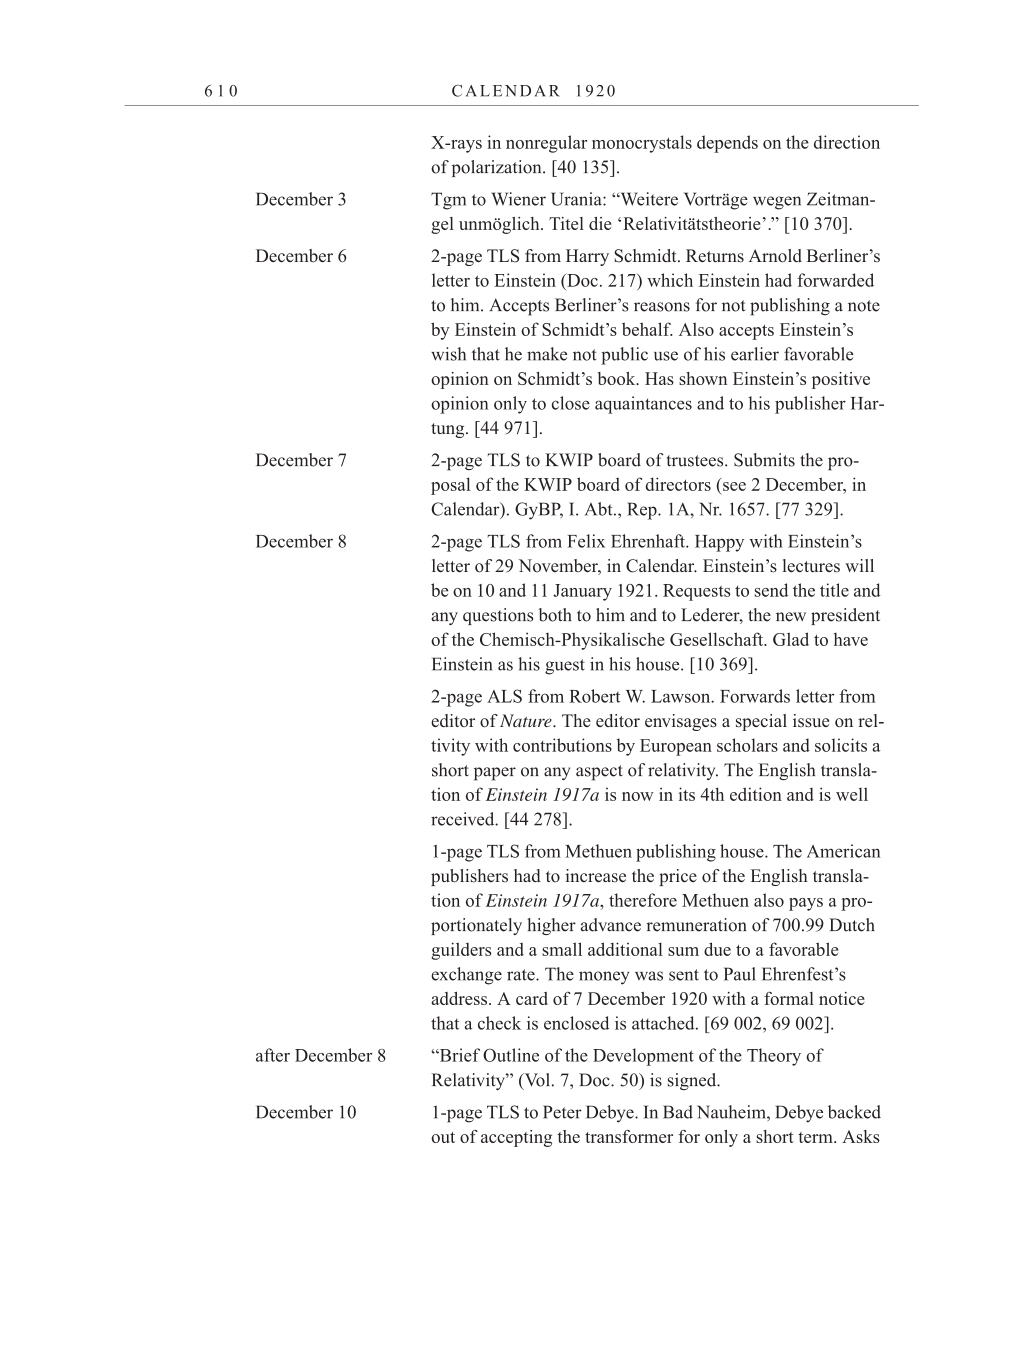 Volume 10: The Berlin Years: Correspondence May-December 1920 / Supplementary Correspondence 1909-1920 page 610